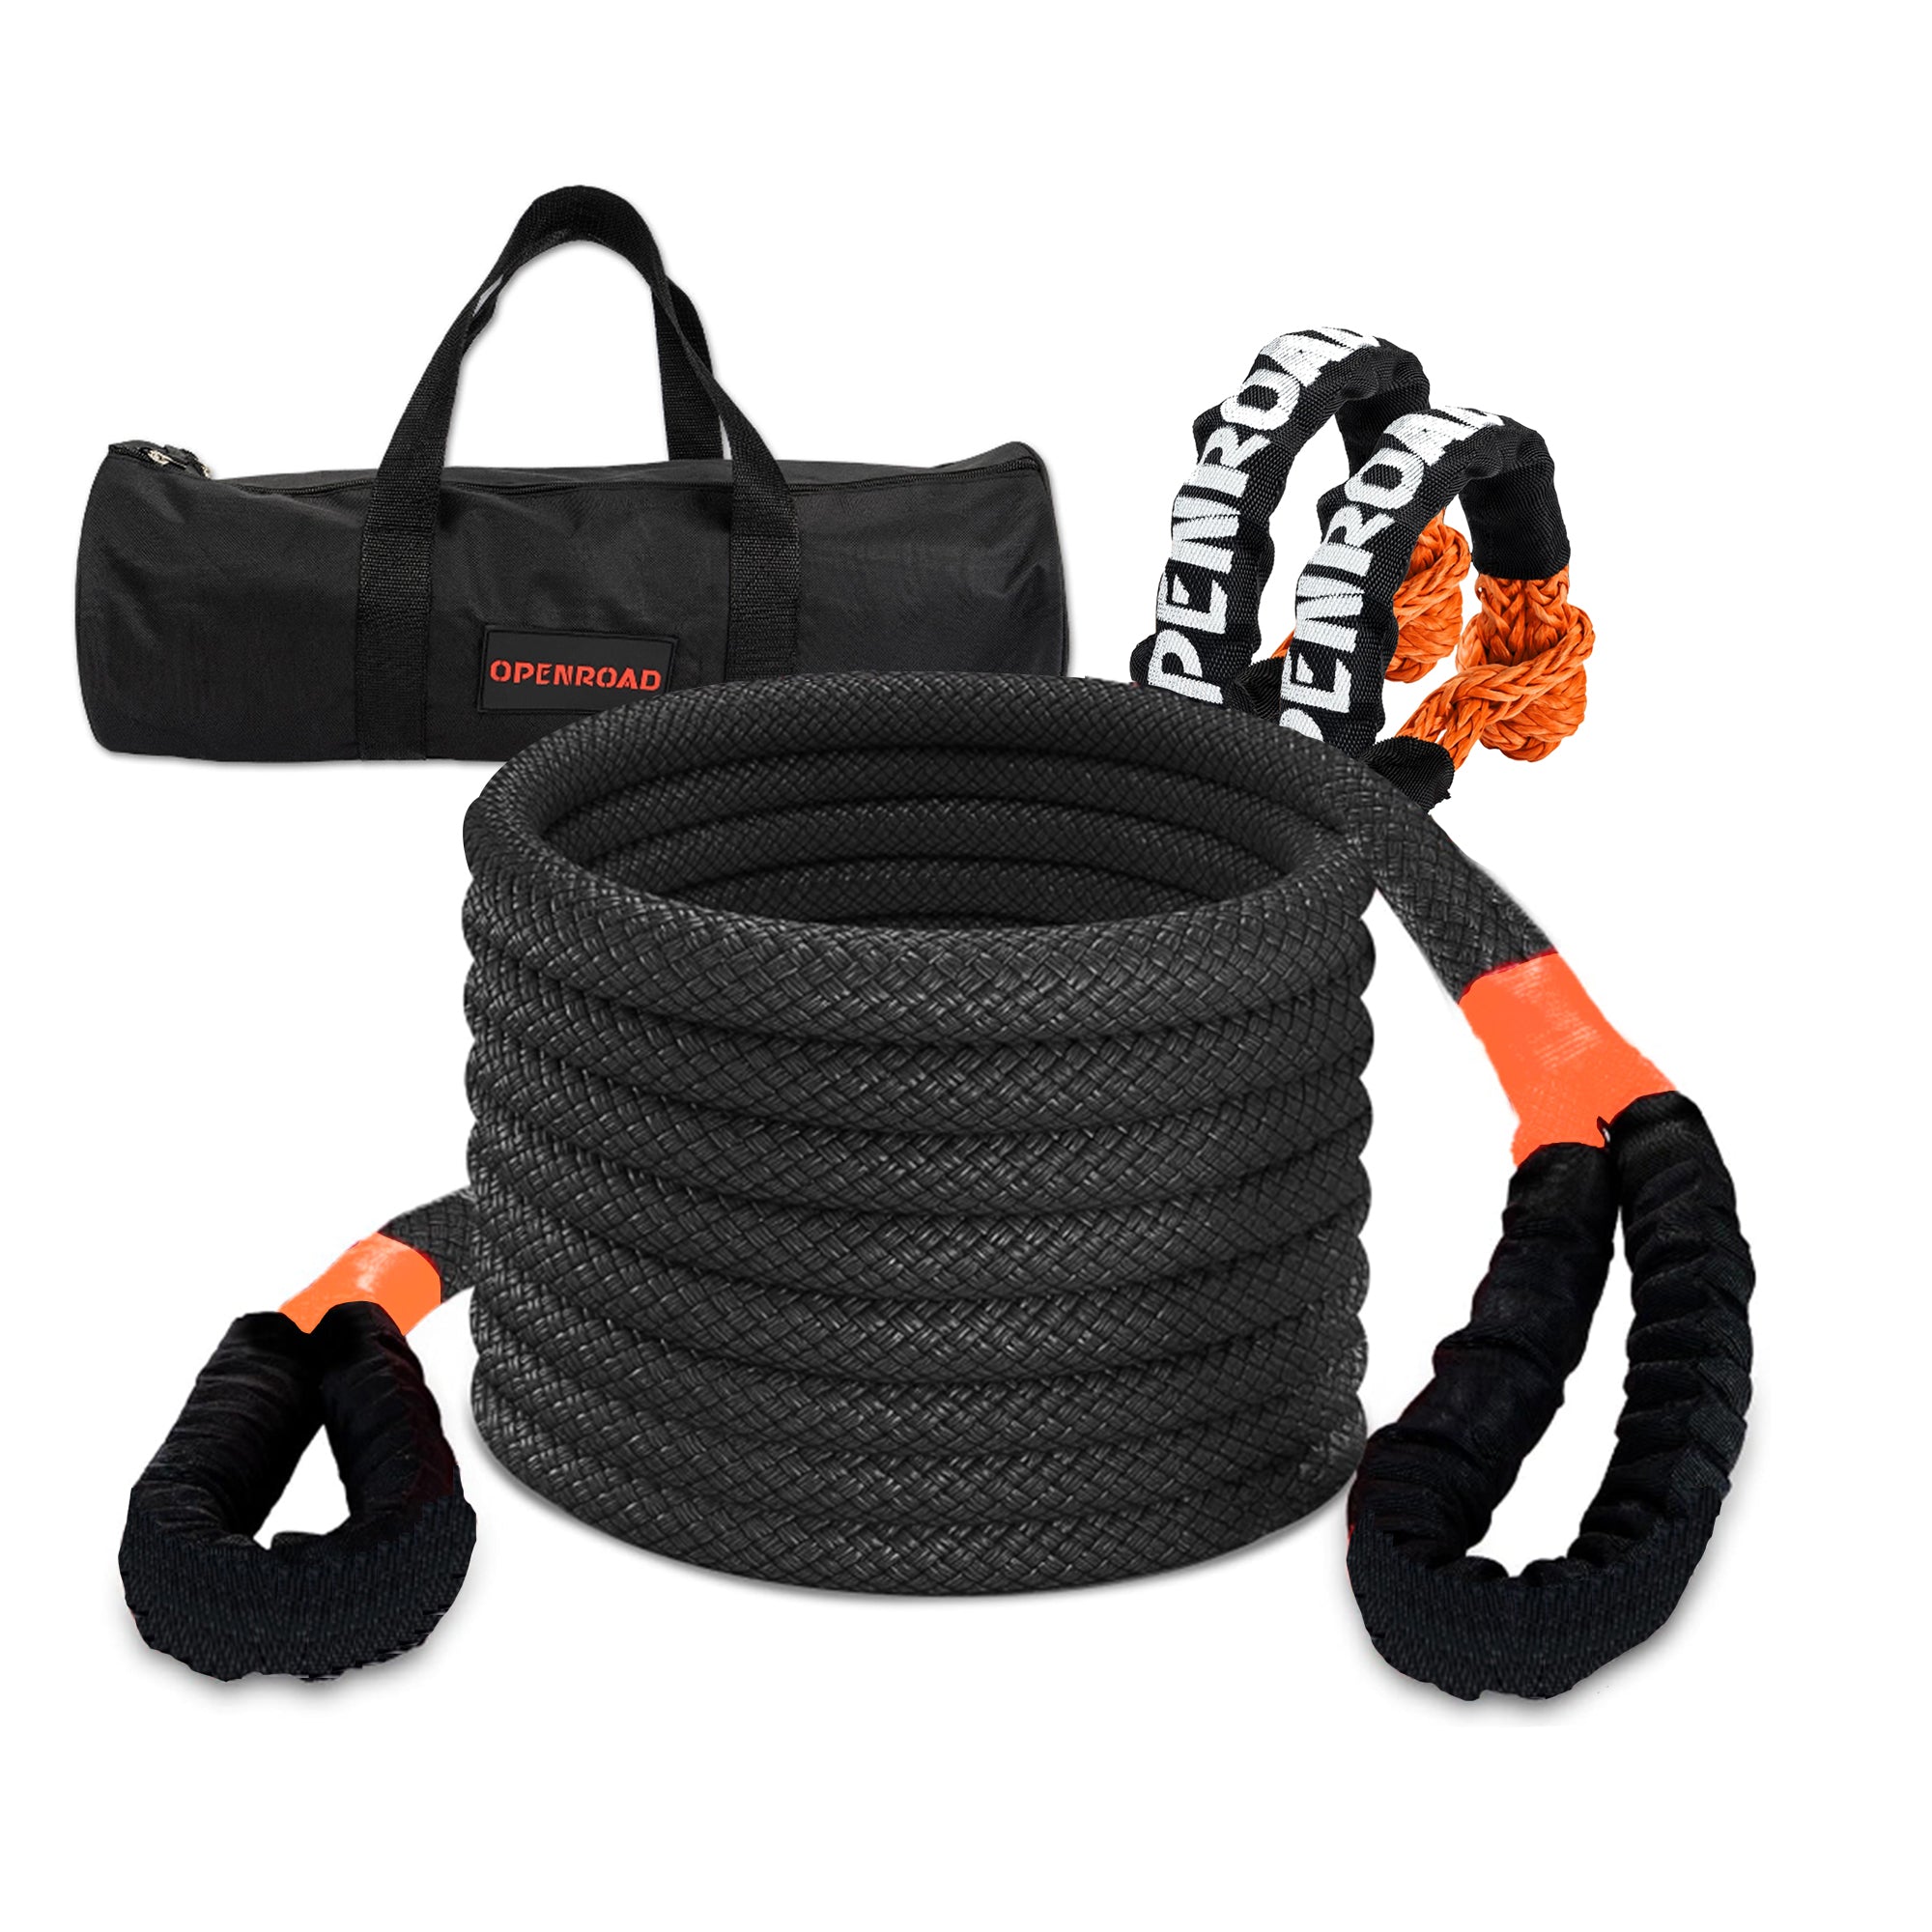 OPENROAD 1" x30' Kinetic Recovery Tow Rope (25,000lbs)，for Truck Off-Road Vehicle ATV UTV, Carry Bag Included,Orange Recovery Straps OPENROAD 1" x30' Tow Rope  